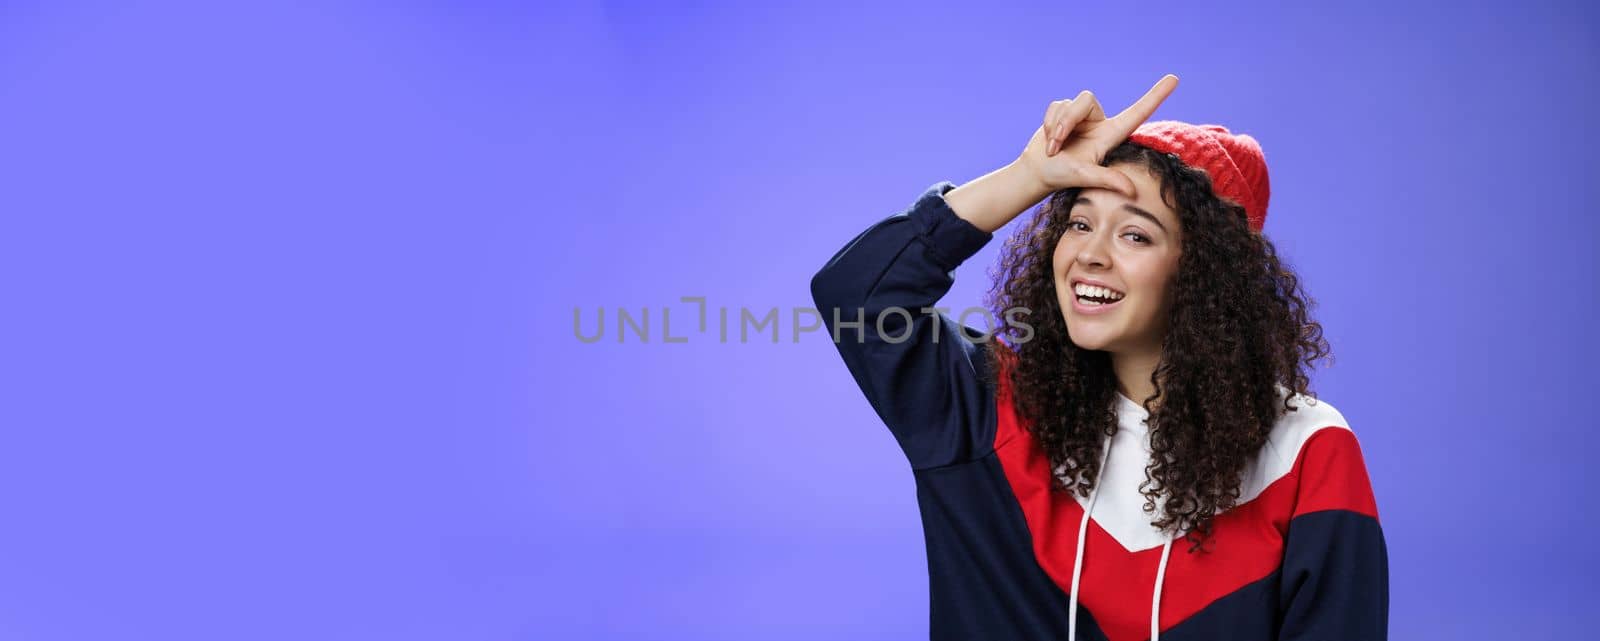 Girl triumphing and mocking friend as winning showing loser gesture on forehead and laughing having fun standing pleased and happy over blue background, smiling at camera joyfully by Benzoix